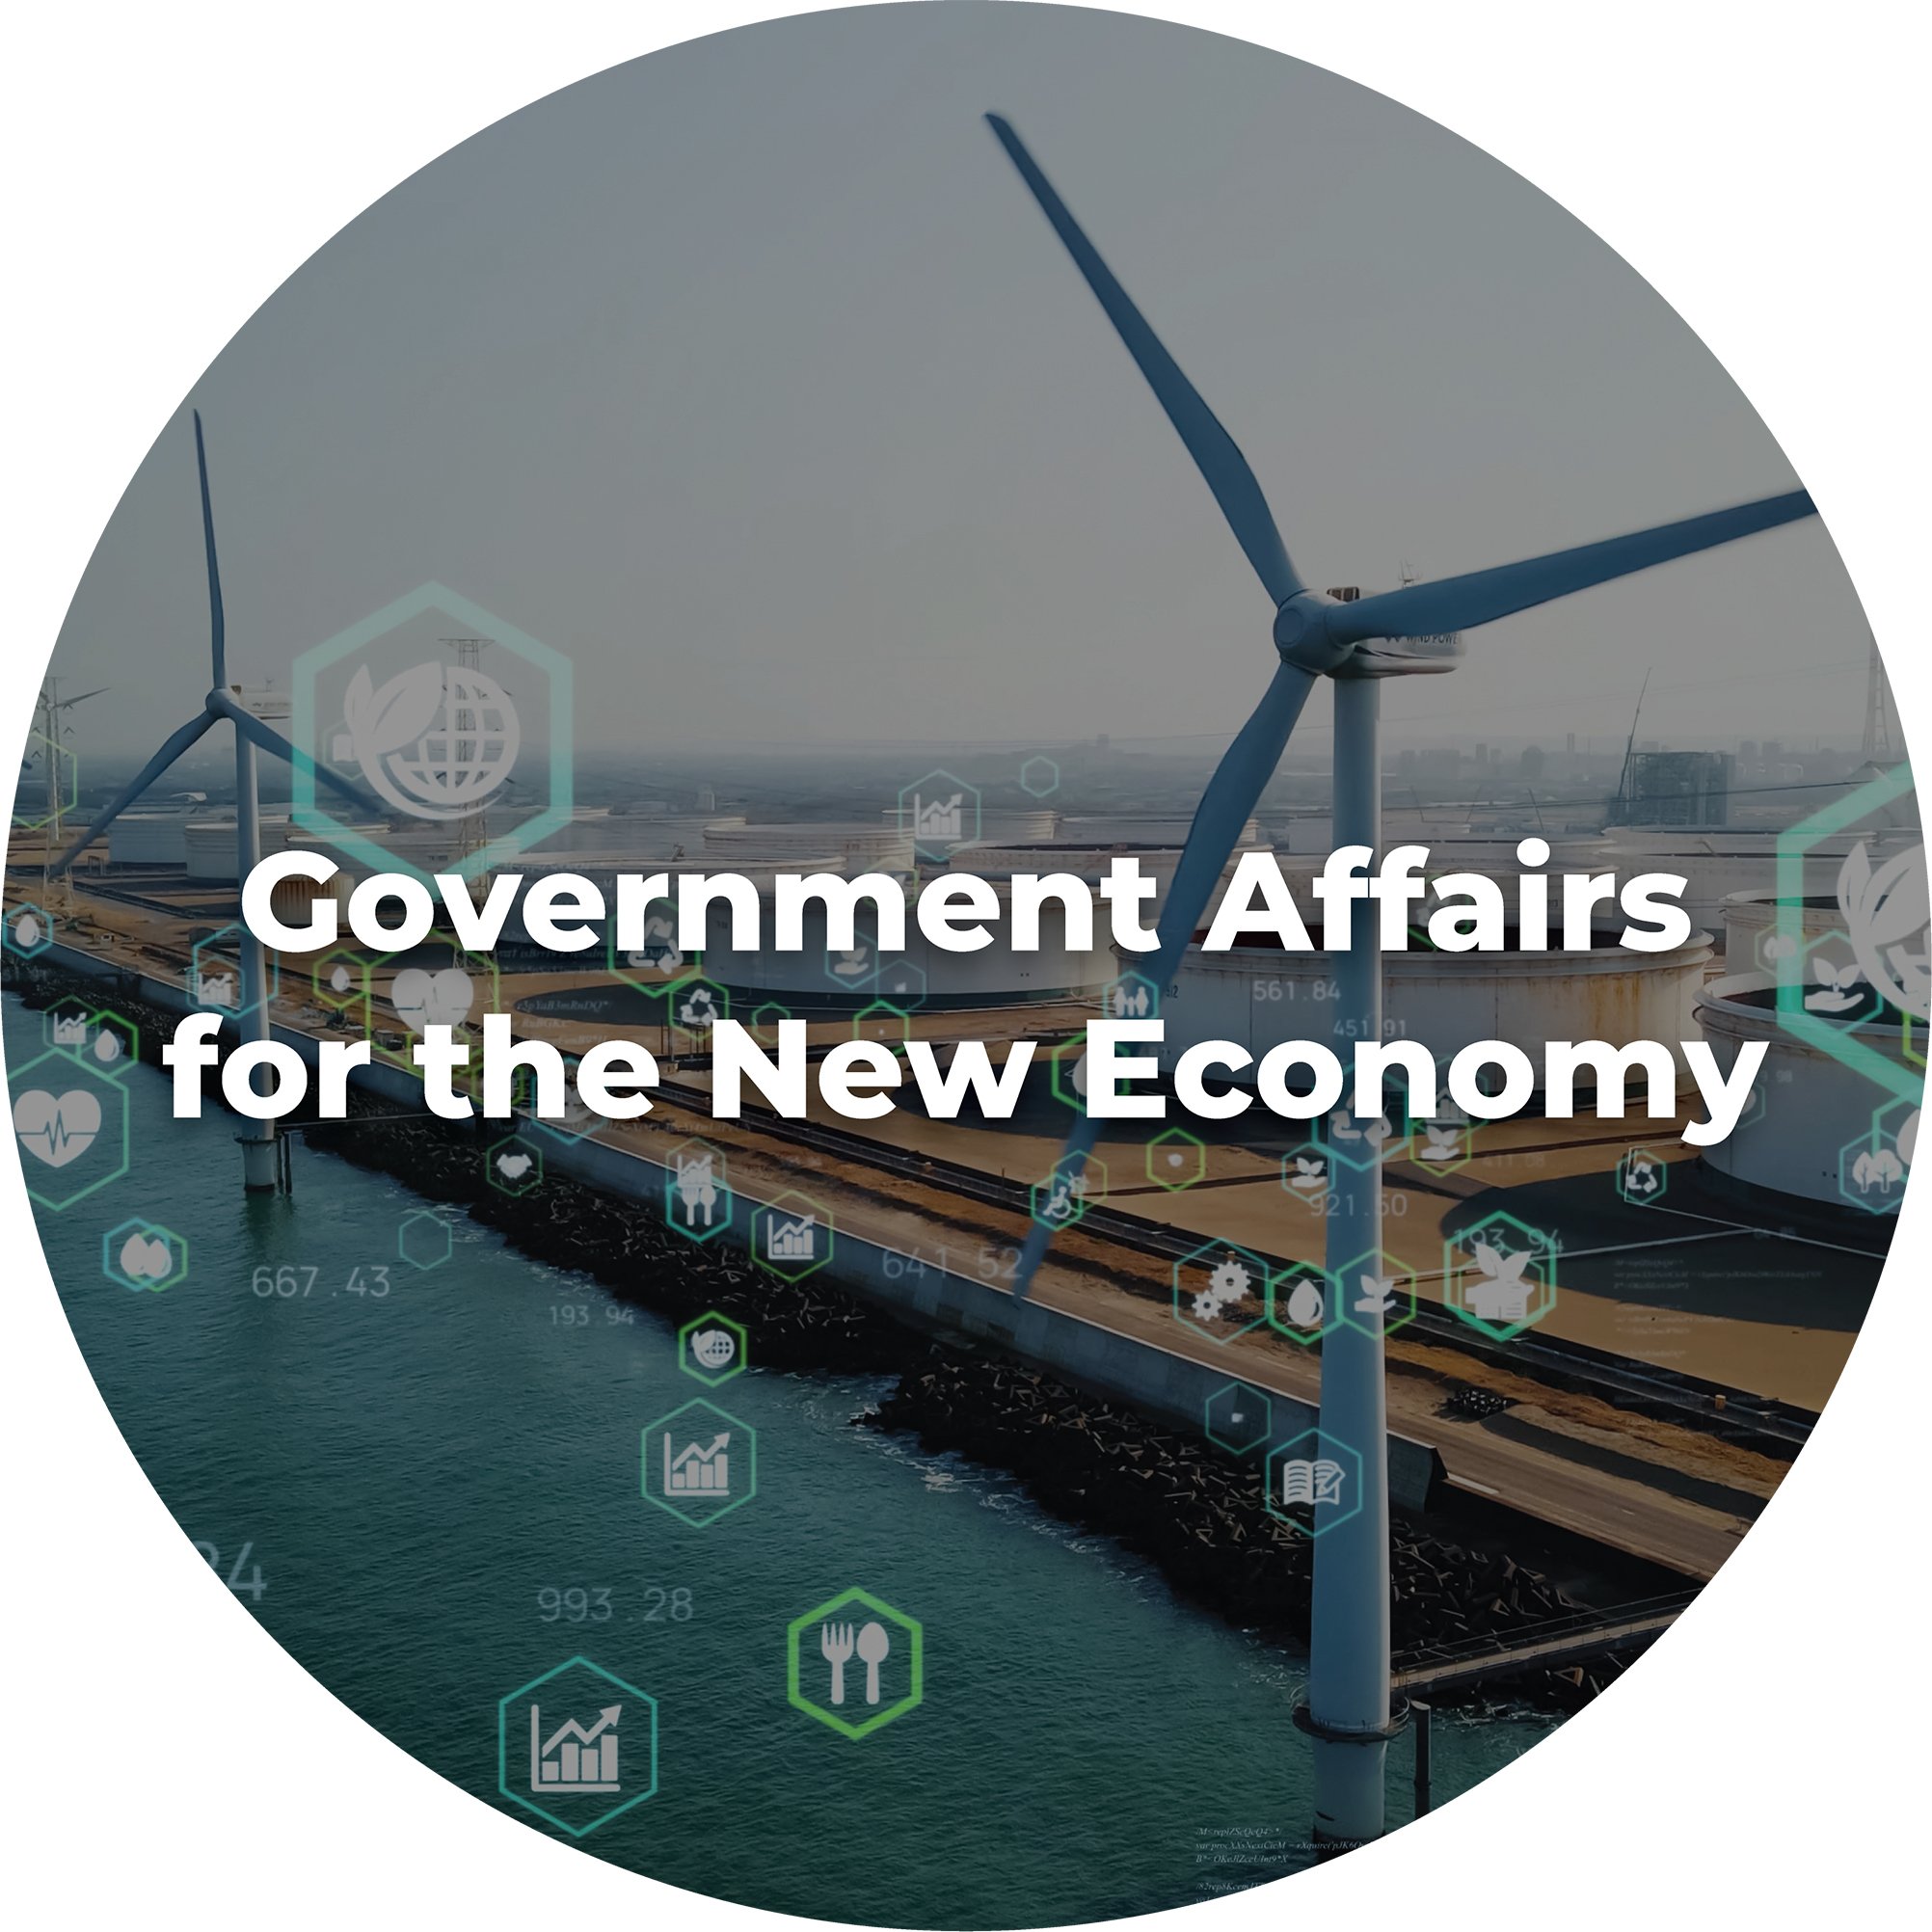 Government Affairs for the New Economy